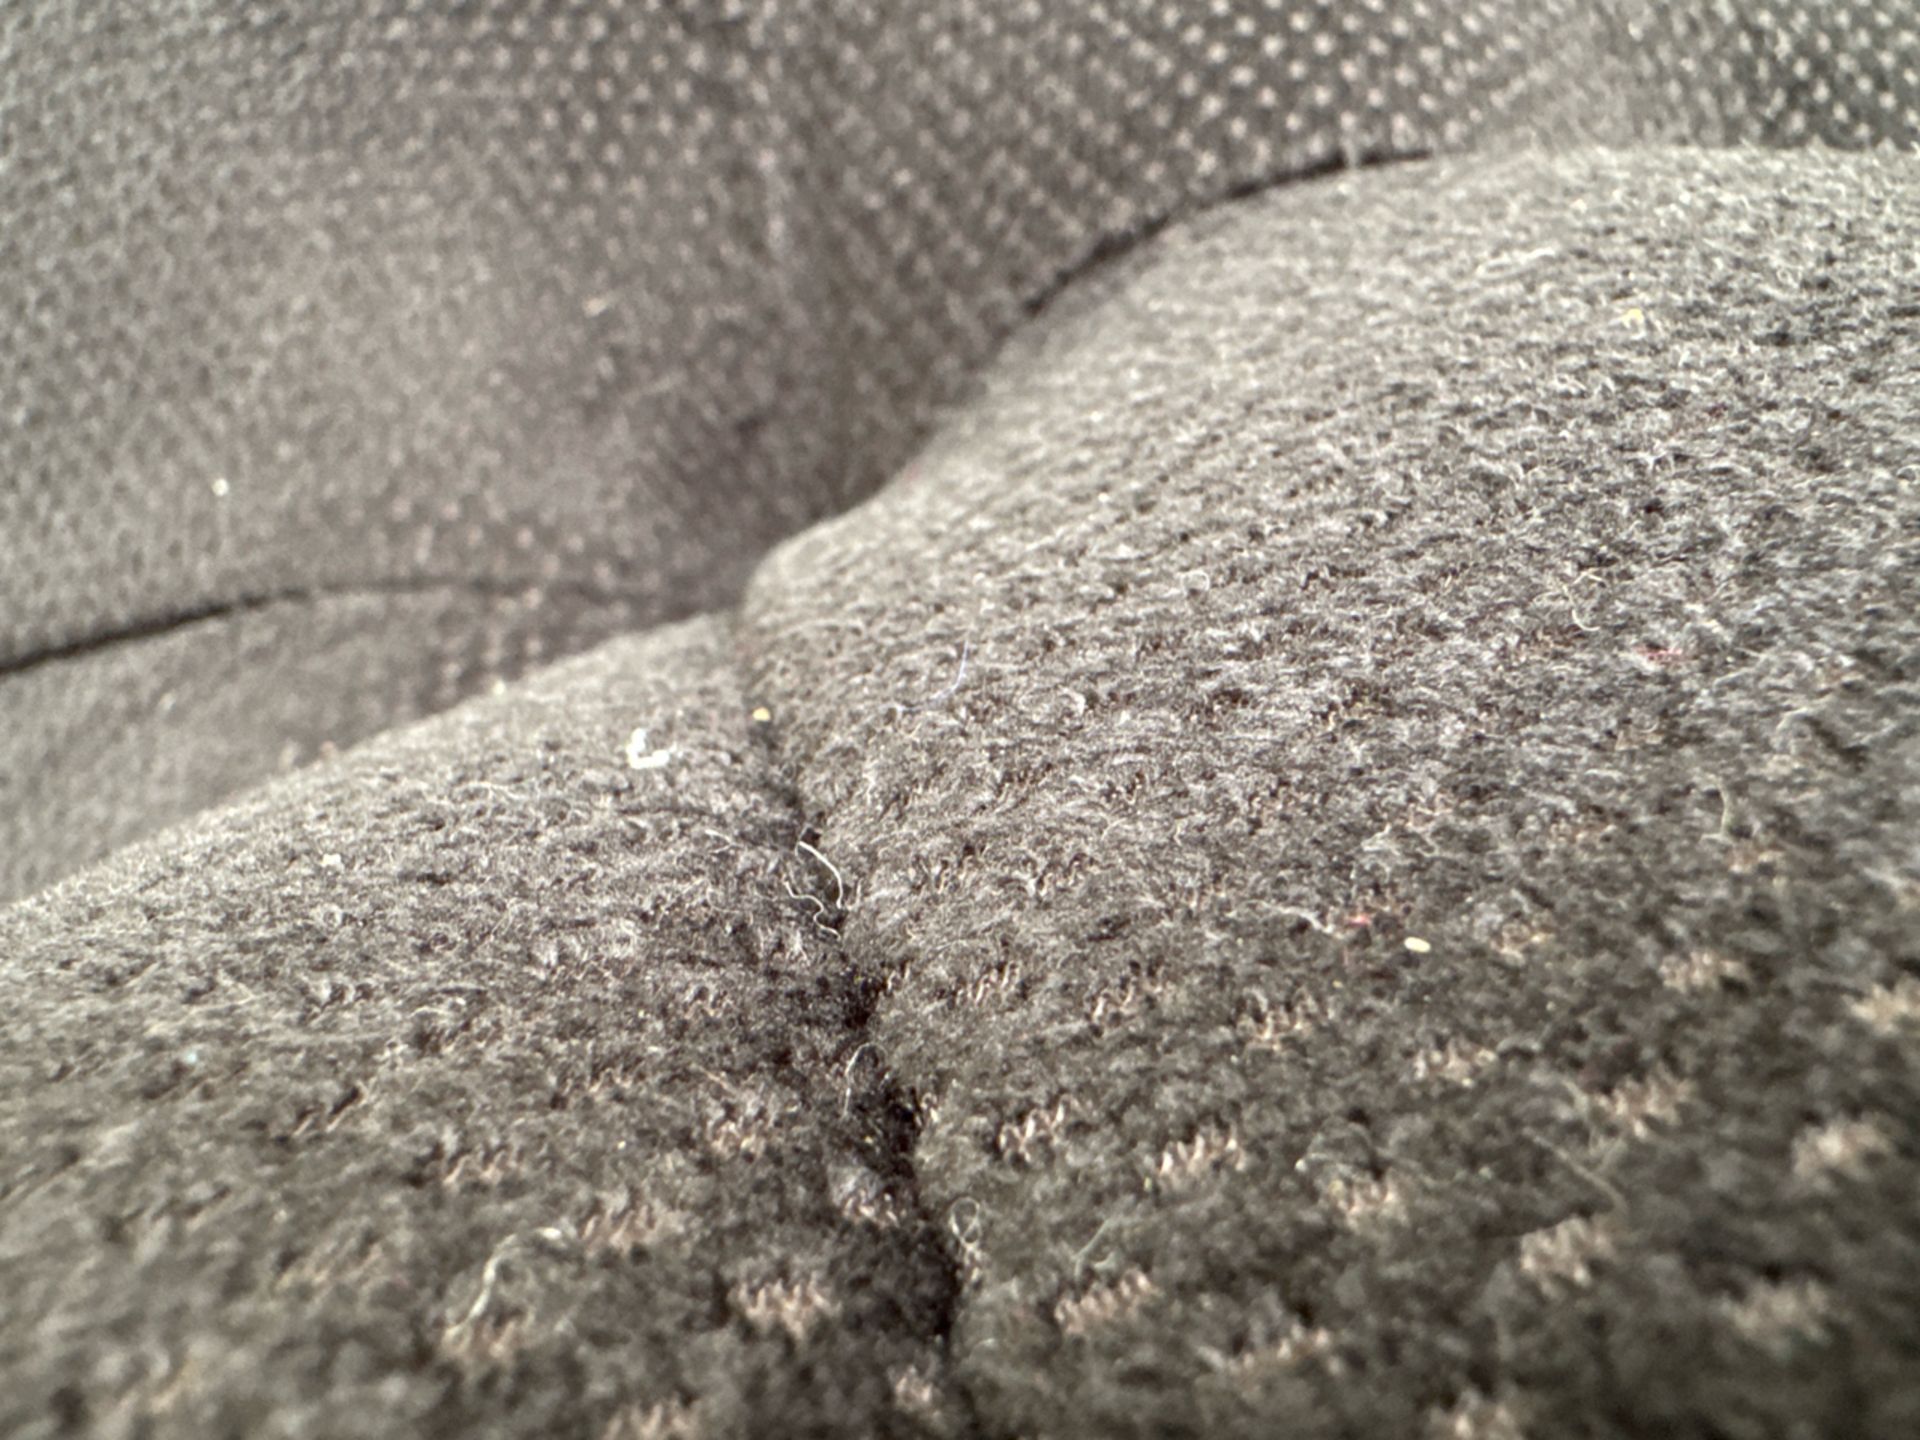 Patrick 2.5 Seat Sofa Bed In Raven Speckled Chenile - Image 6 of 7